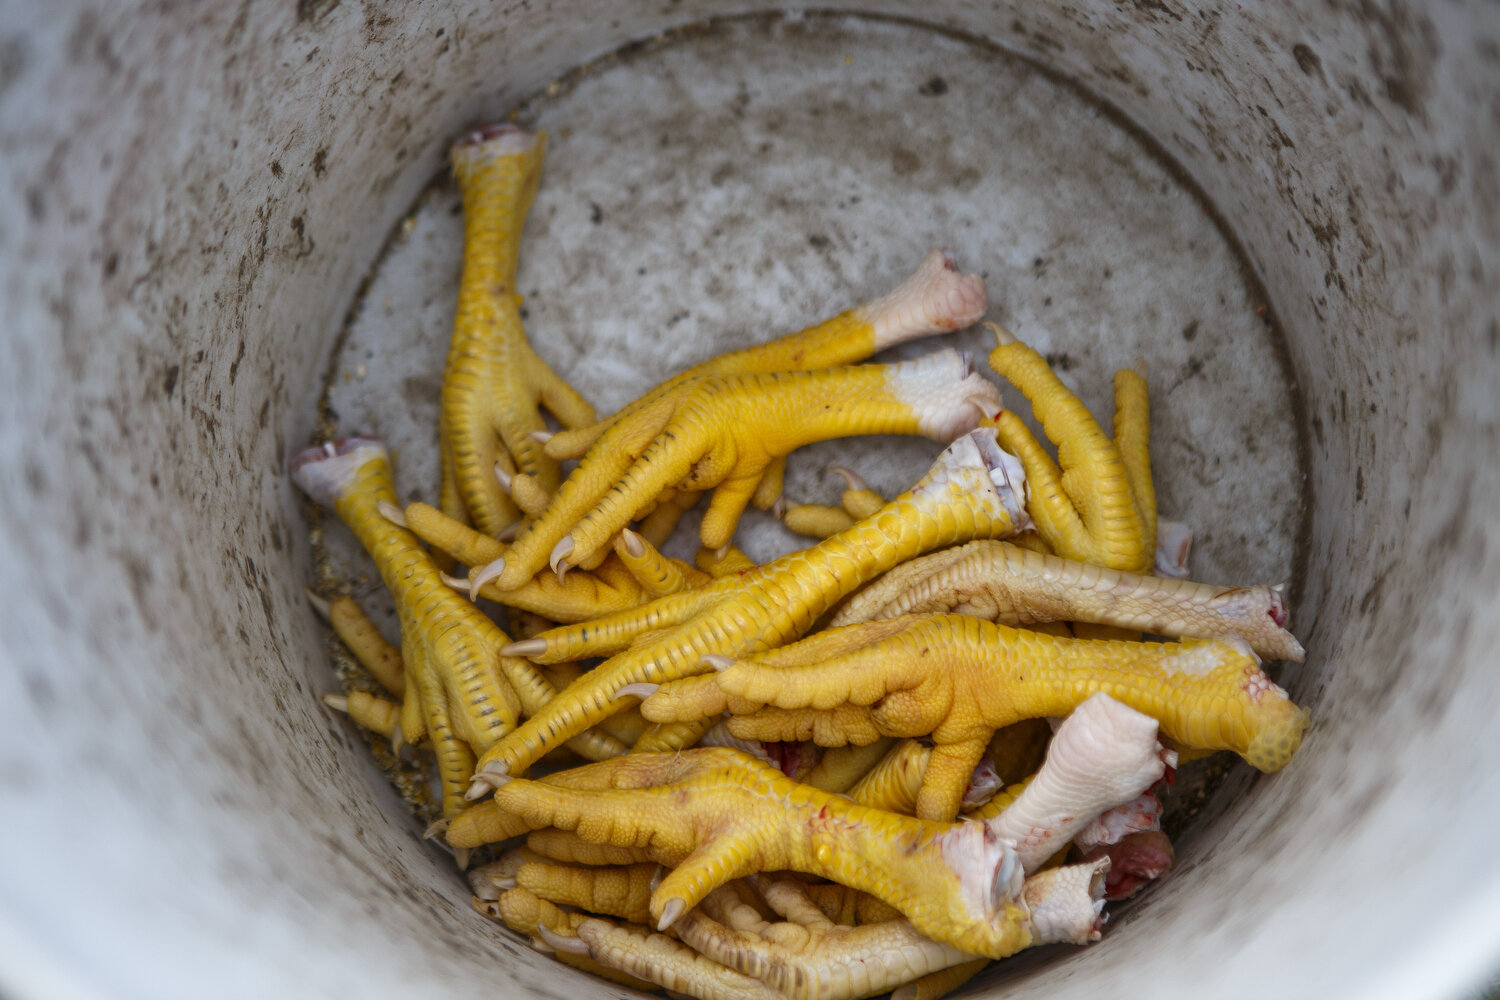  Chicken feet fill a bucket after Connie and Millard Locklear spent the day processing chickens. 